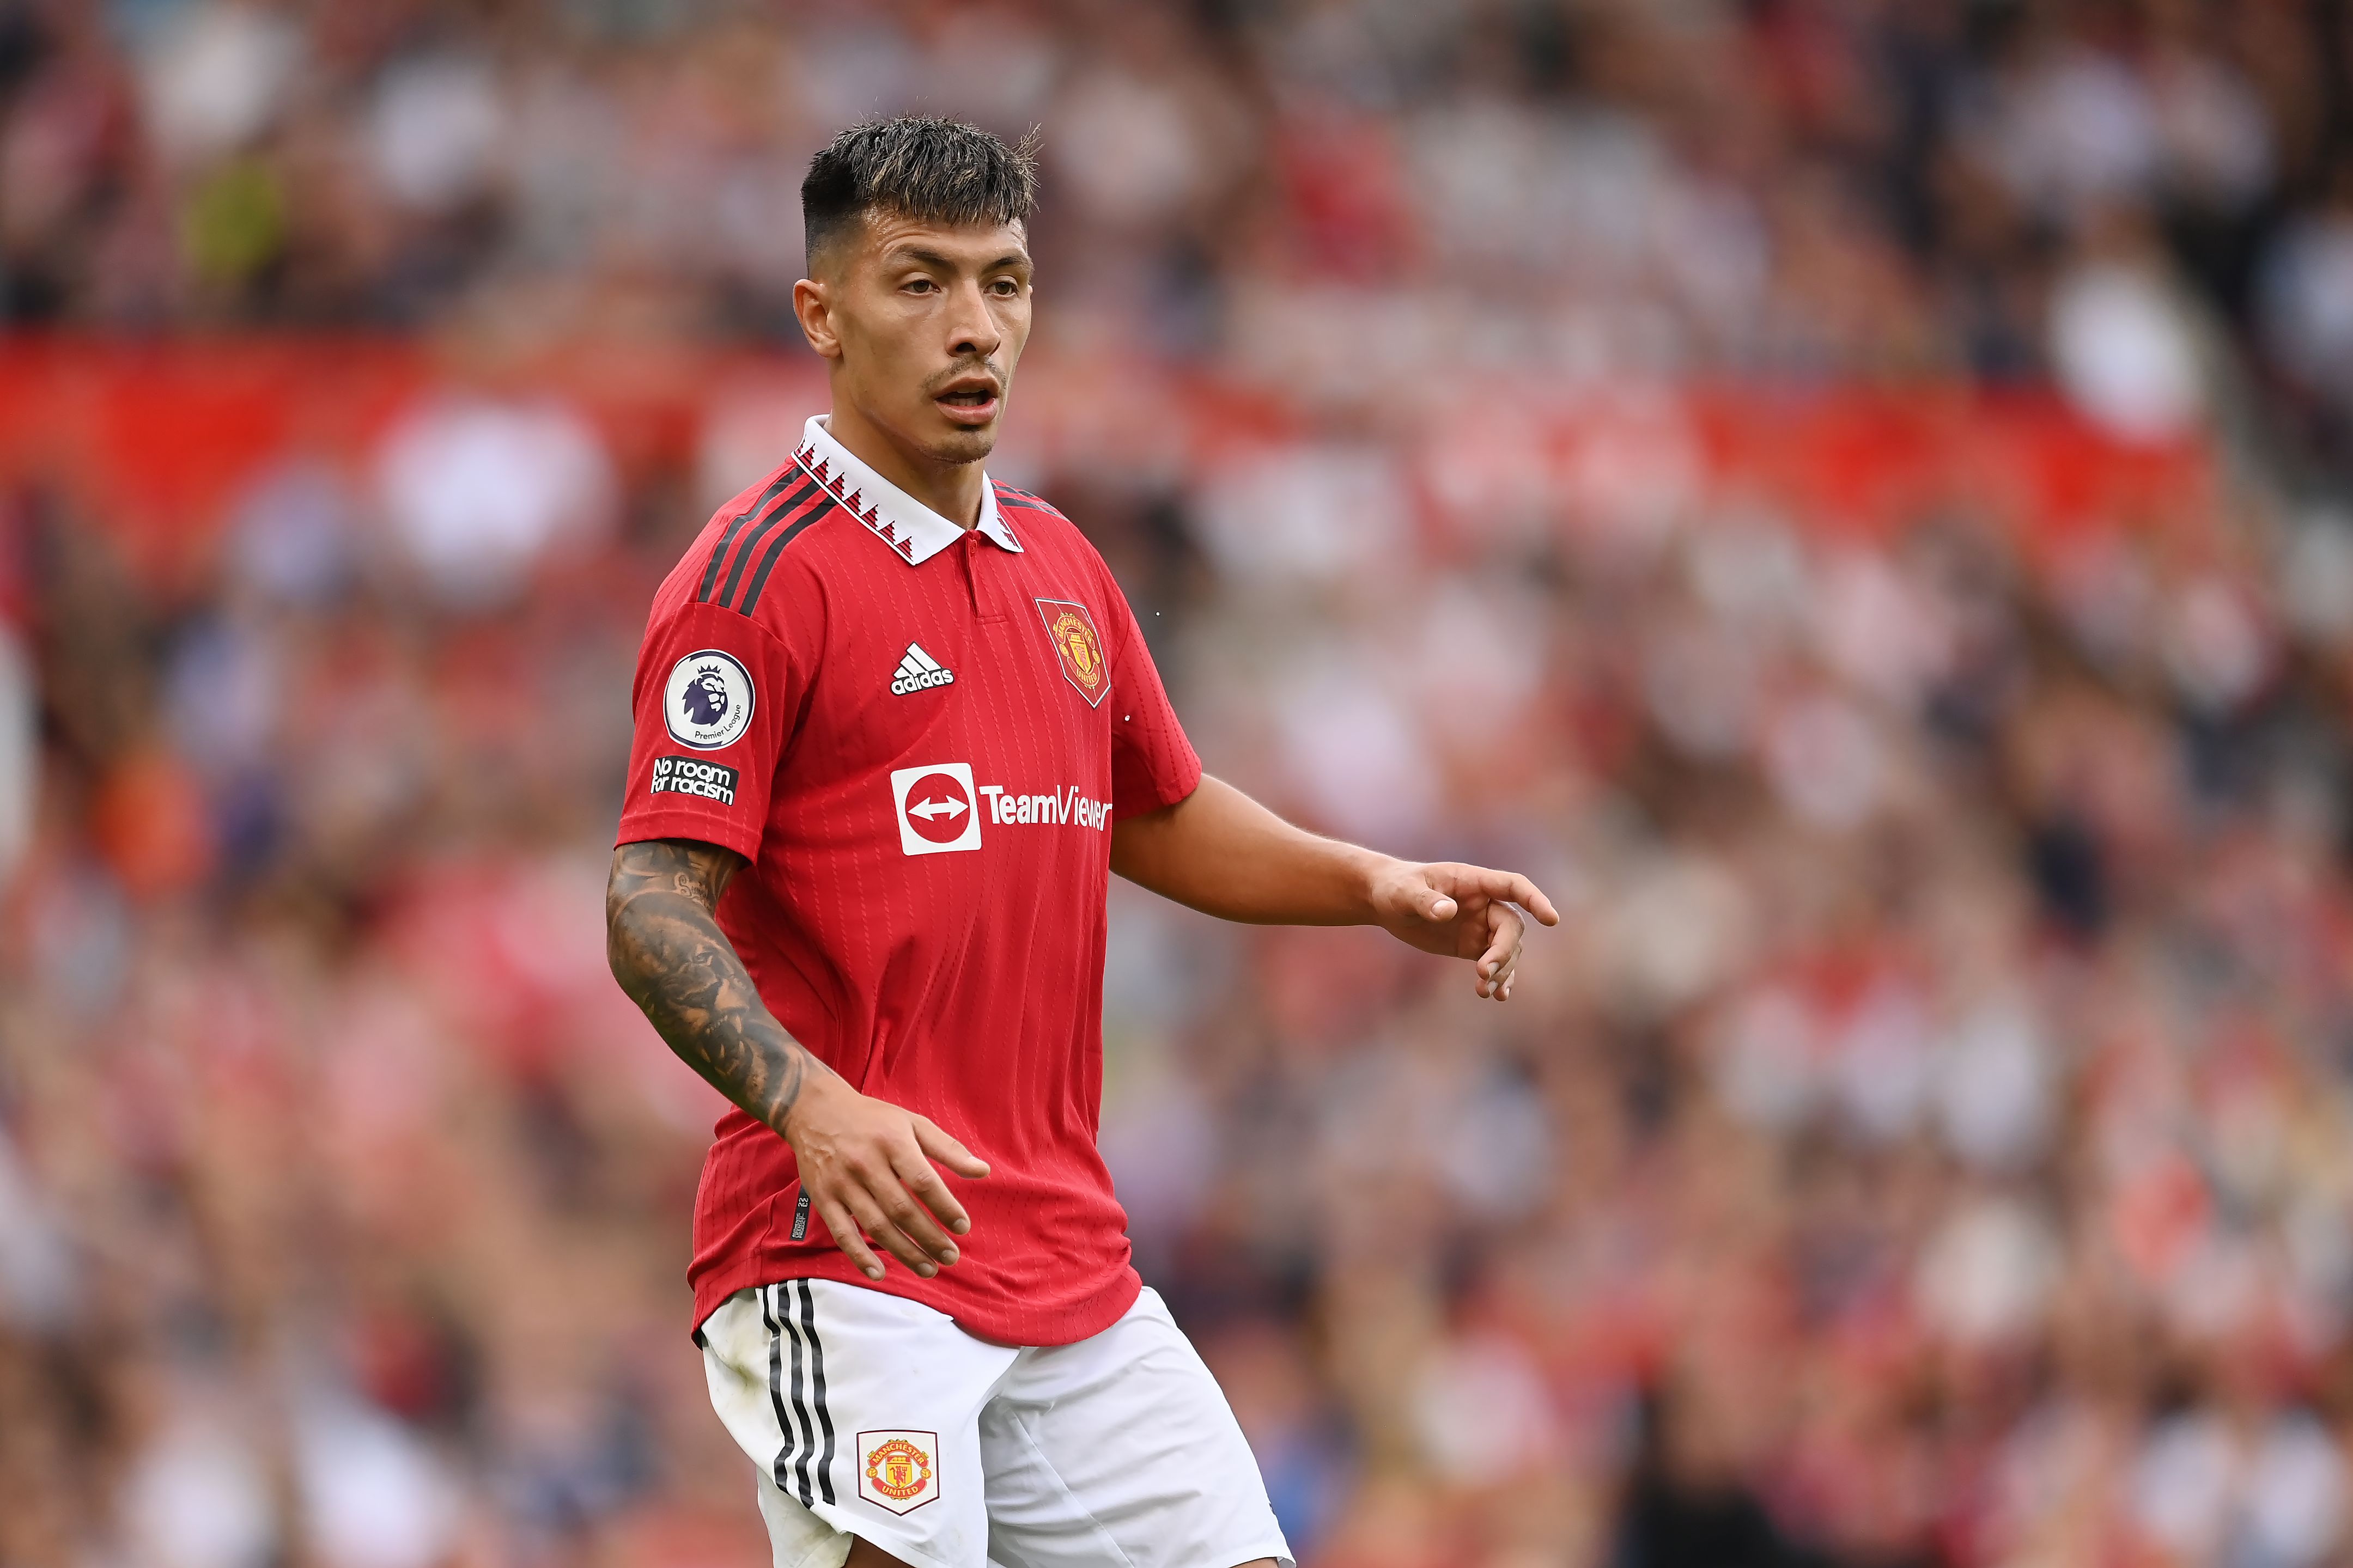 Lisandro Martínez of Manchester United in action 